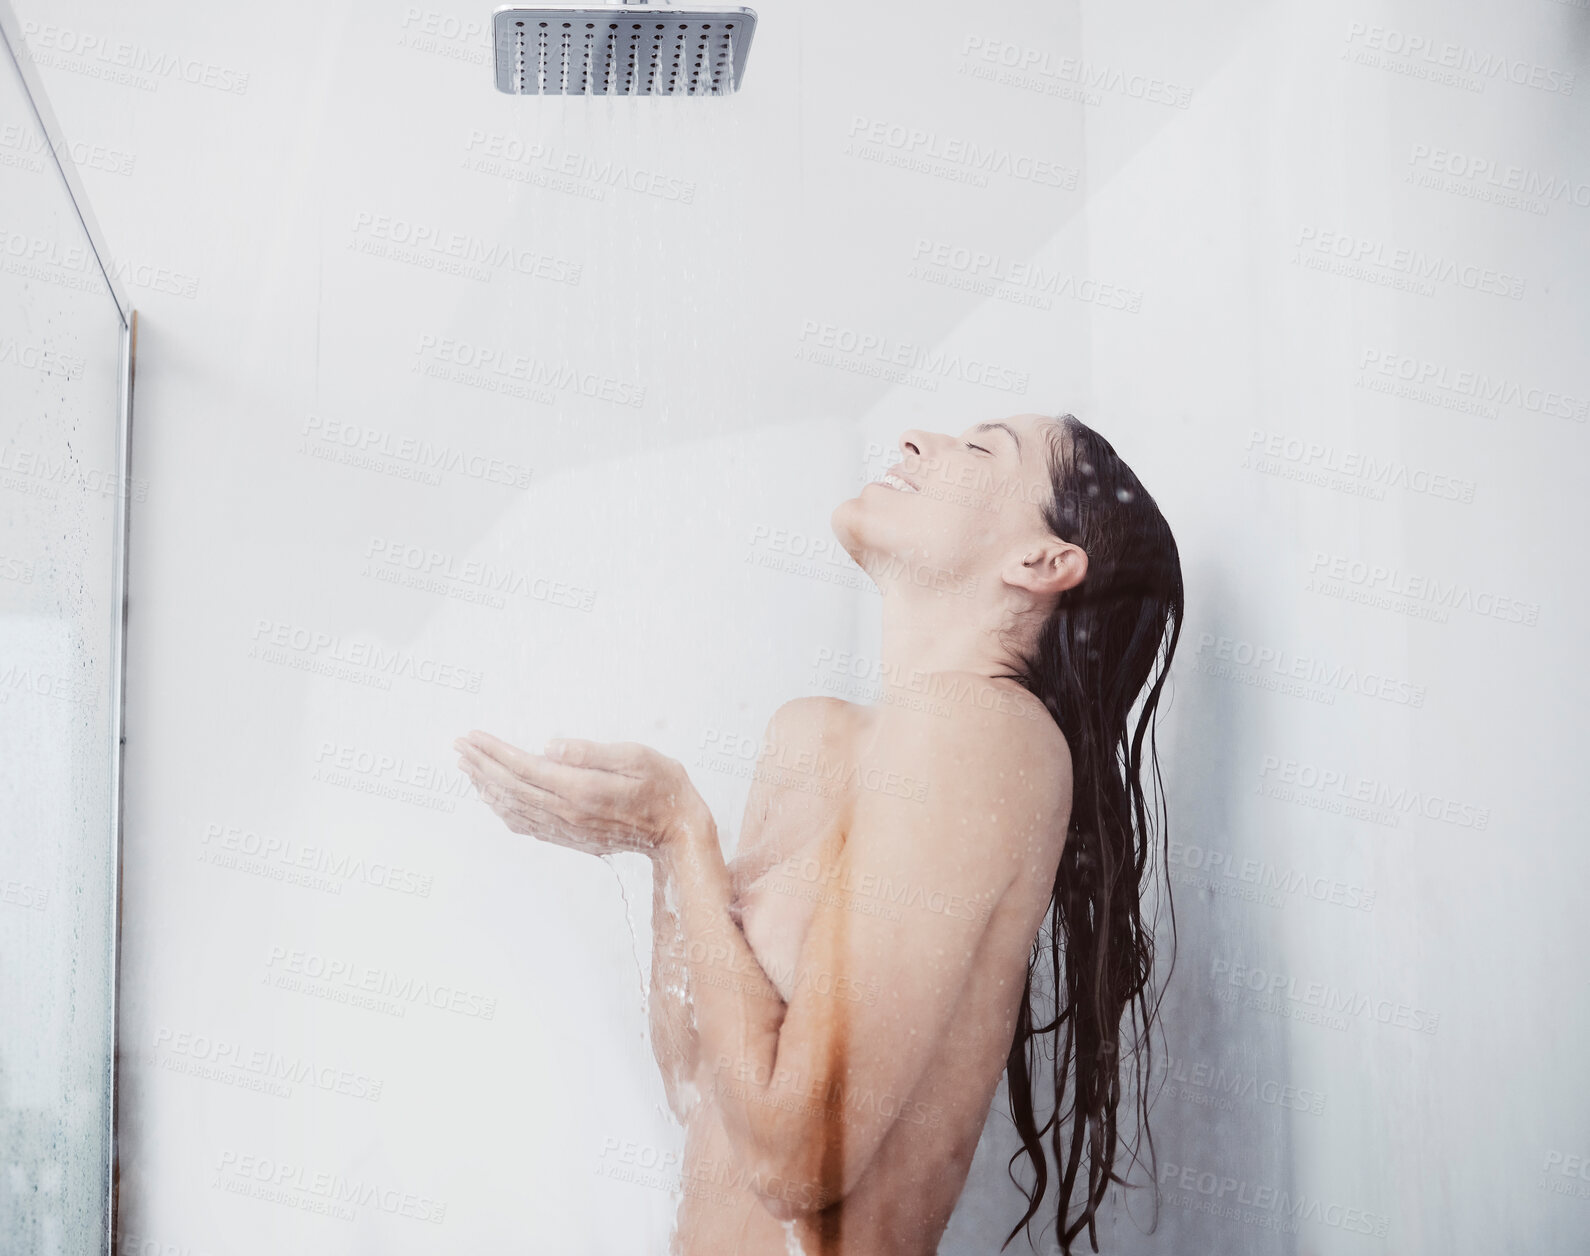 Buy stock photo Shot of a young woman taking a shower